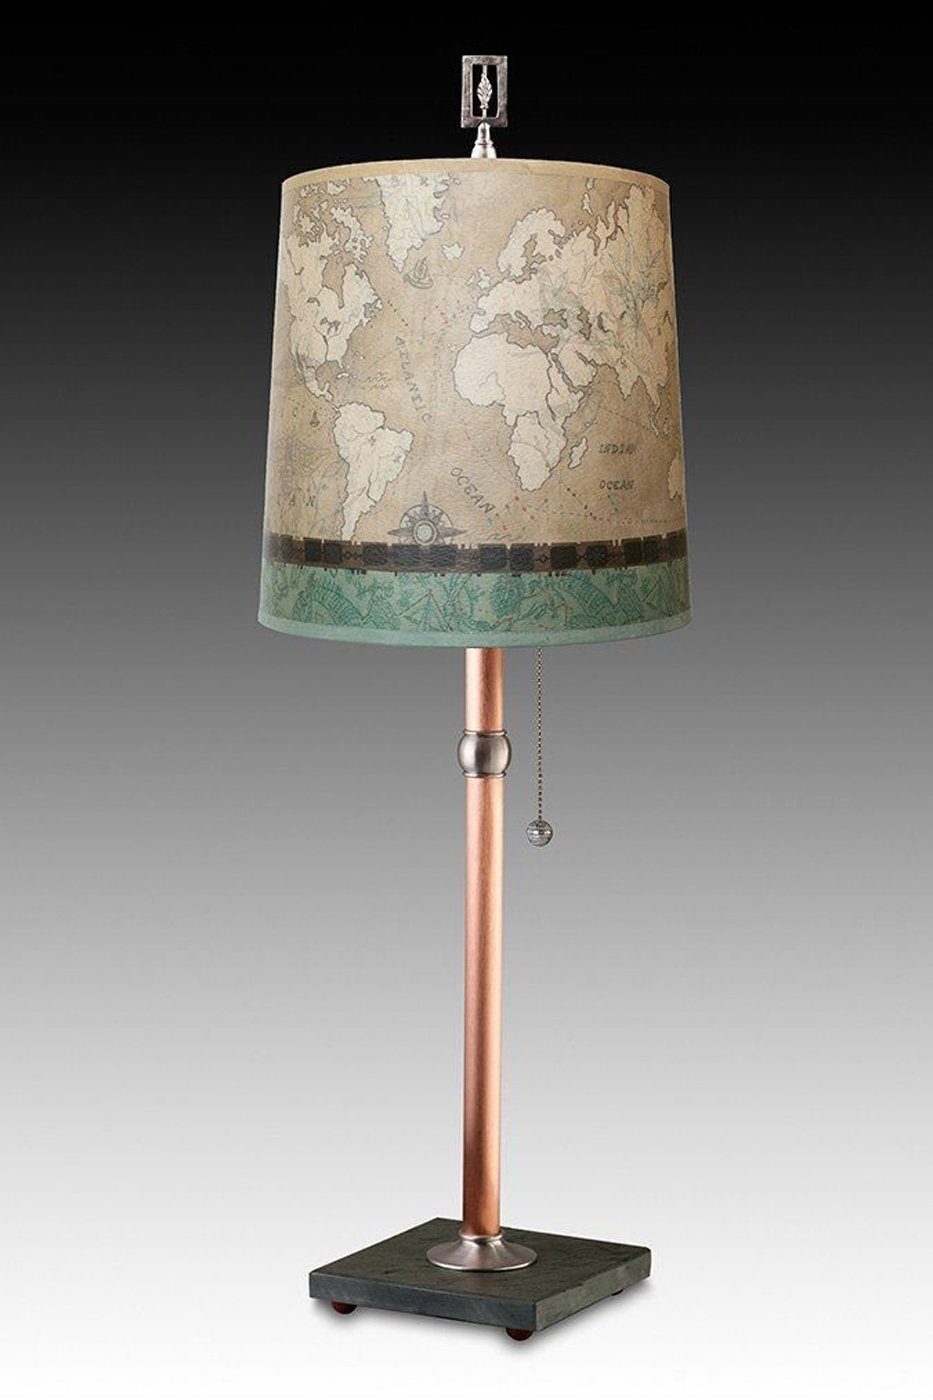 Copper Table Lamp with Medium Drum Shade in Voyages